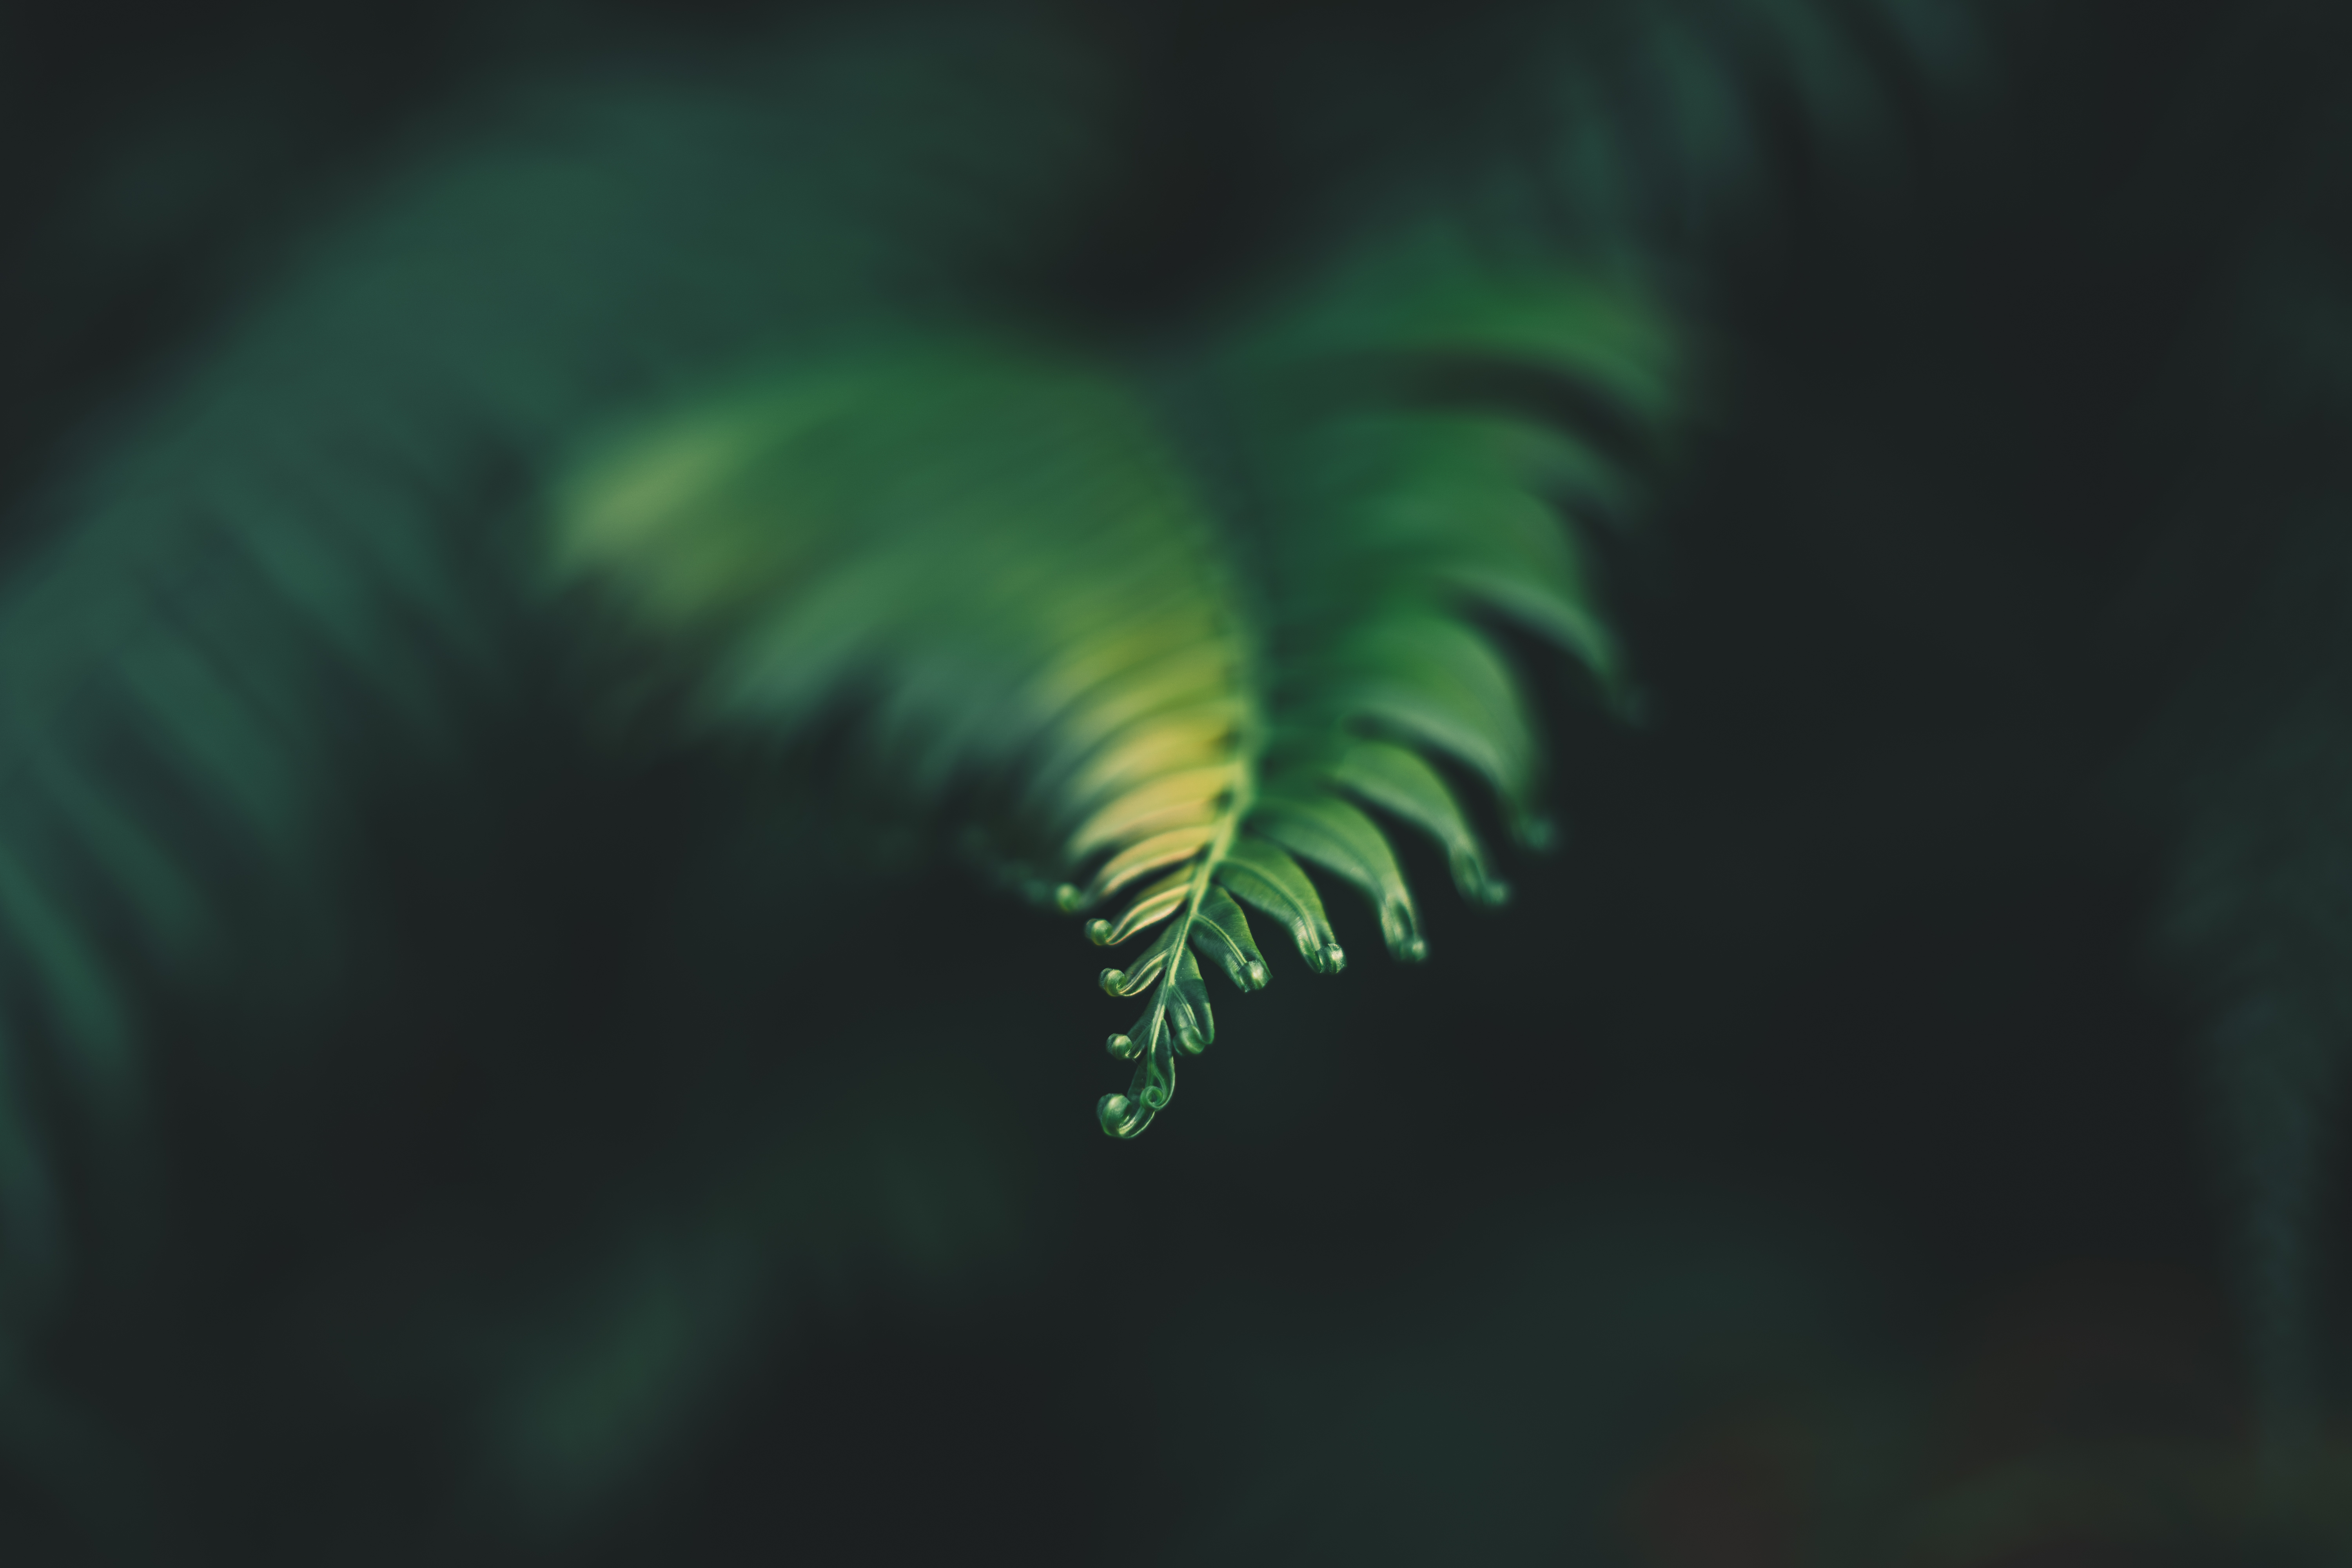 carved, green, plant, macro, blur, smooth, sheet, leaf cellphone